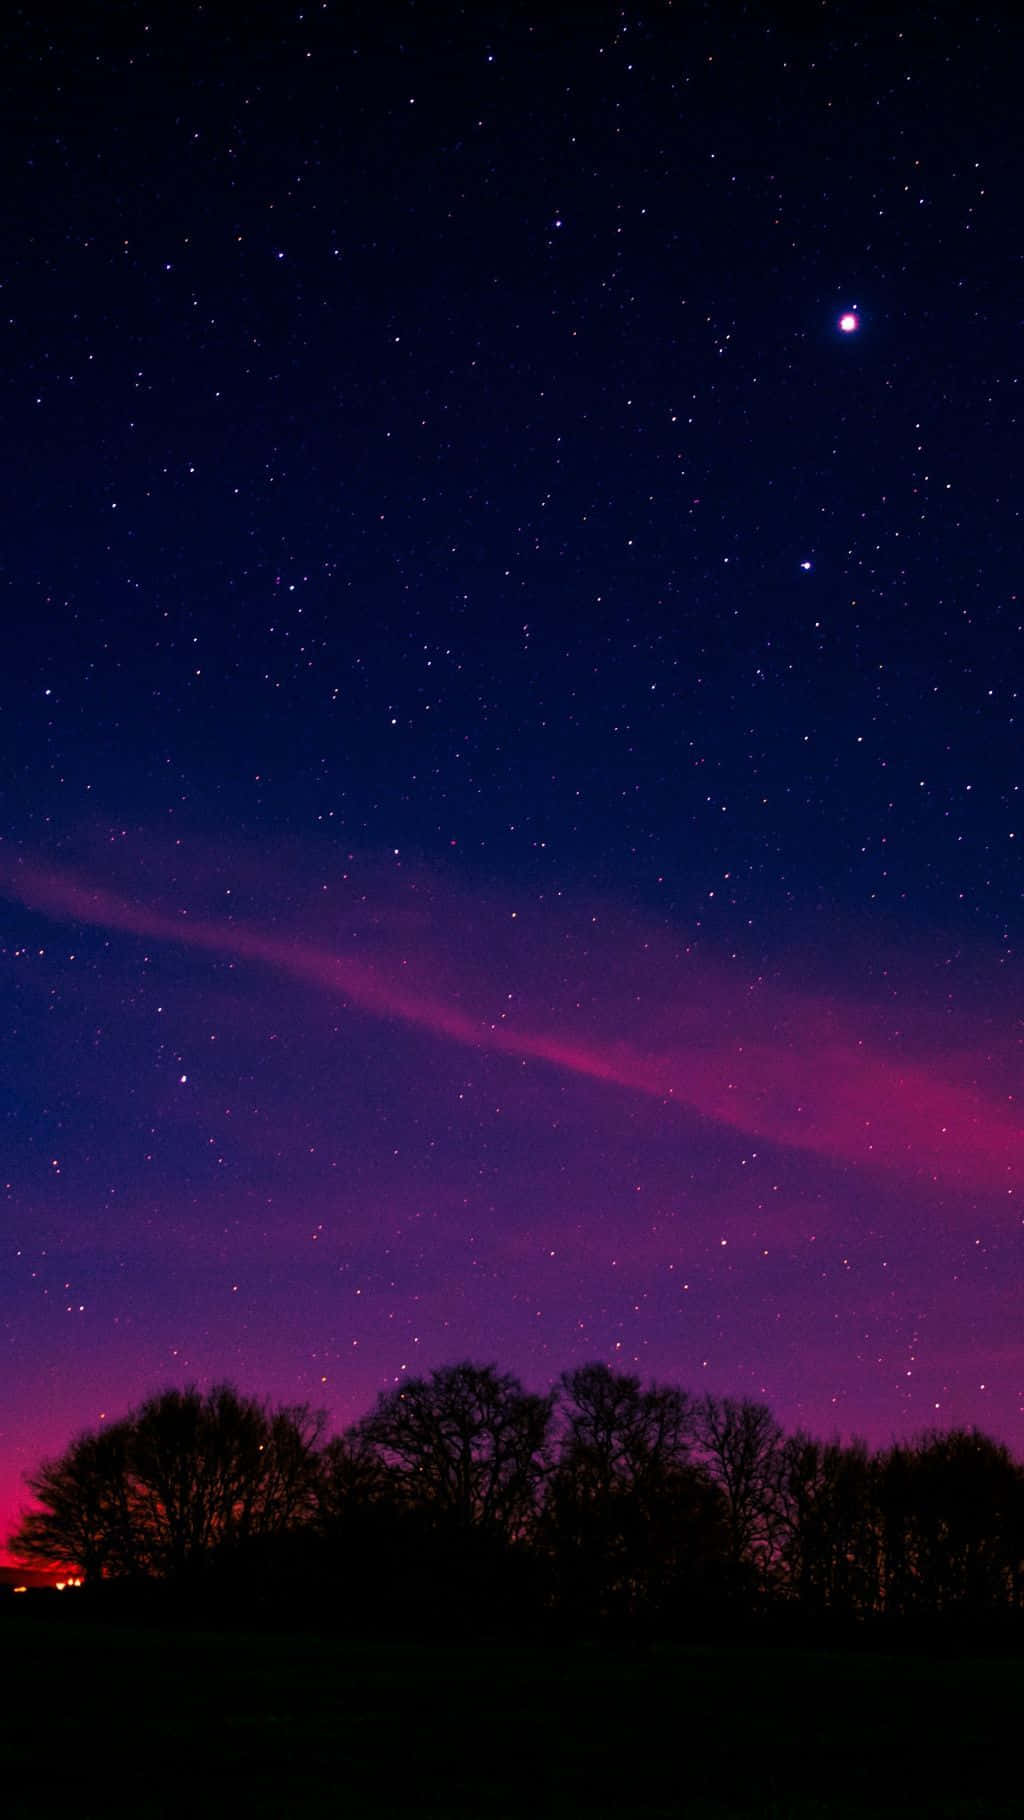 tumblr night sky backgrounds